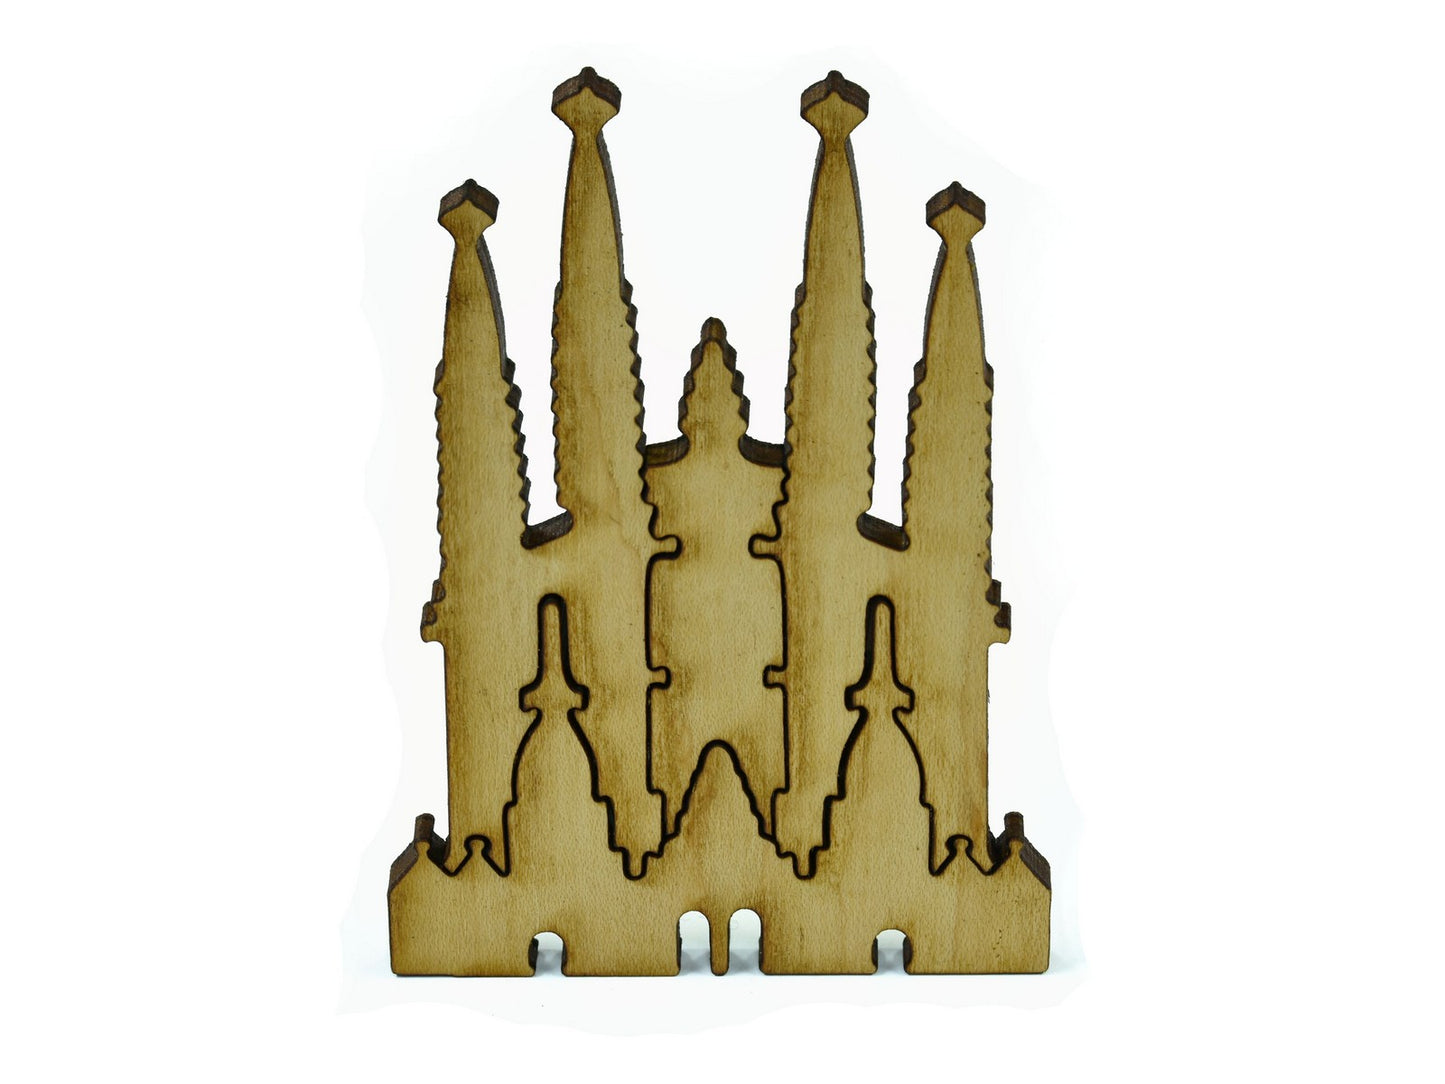 A closeup of pieces in the shape of a cathedral.